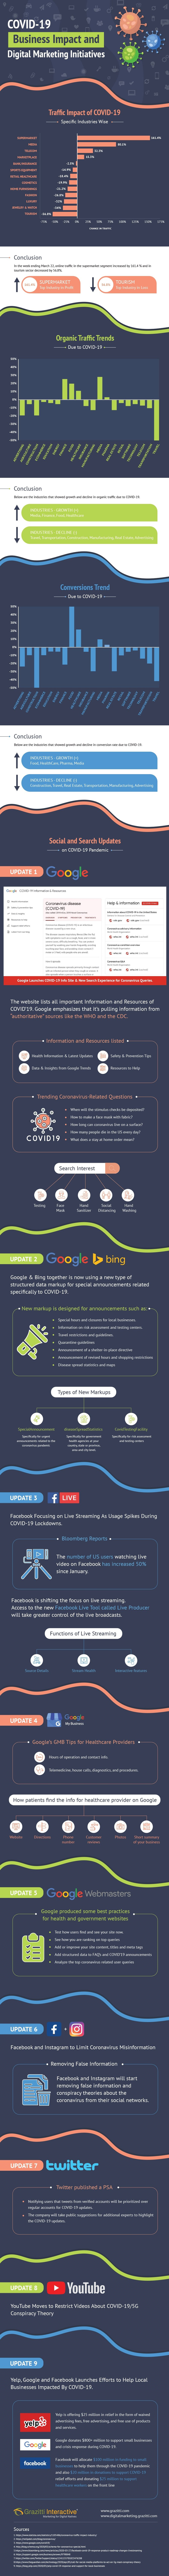 200604-infographic-COVID19-Business-Impact-and-Digital-Marketing-Initiatives (1)